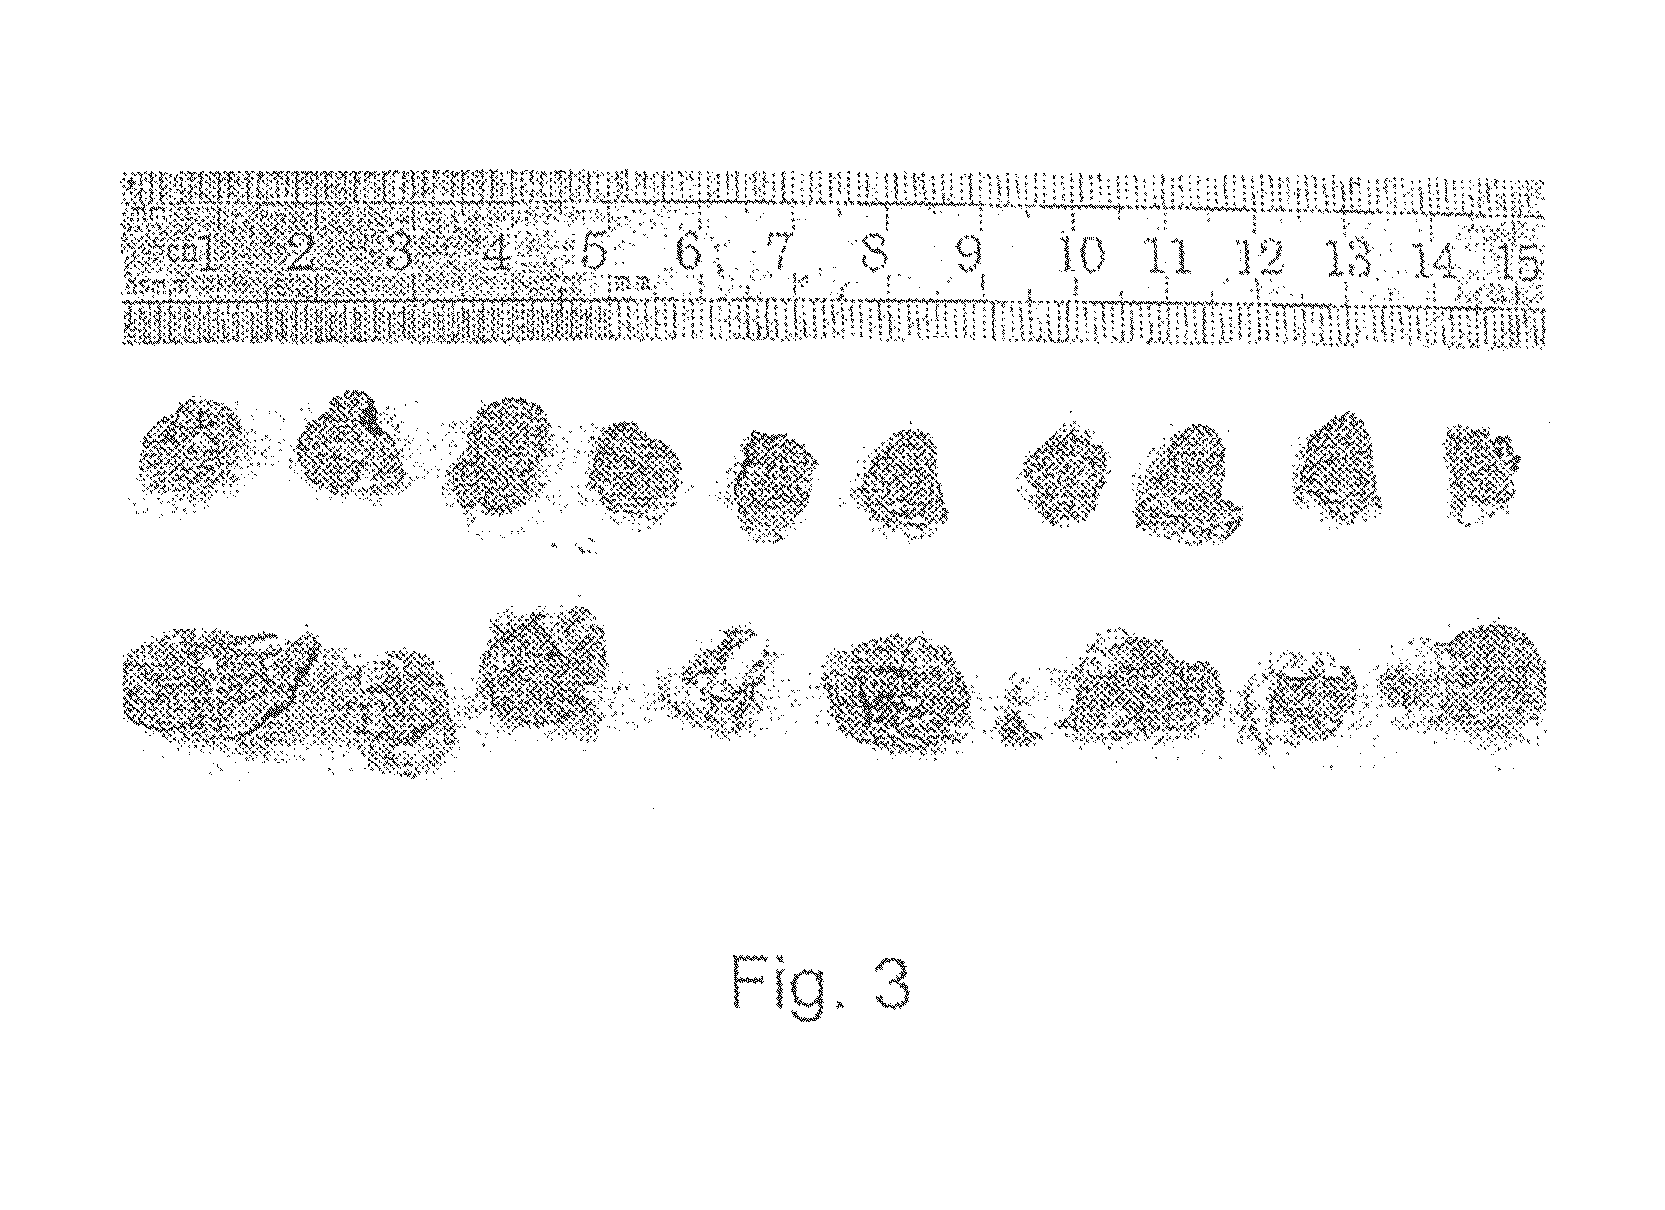 Methods for decreasing leptin levels or activity for treating inflammation